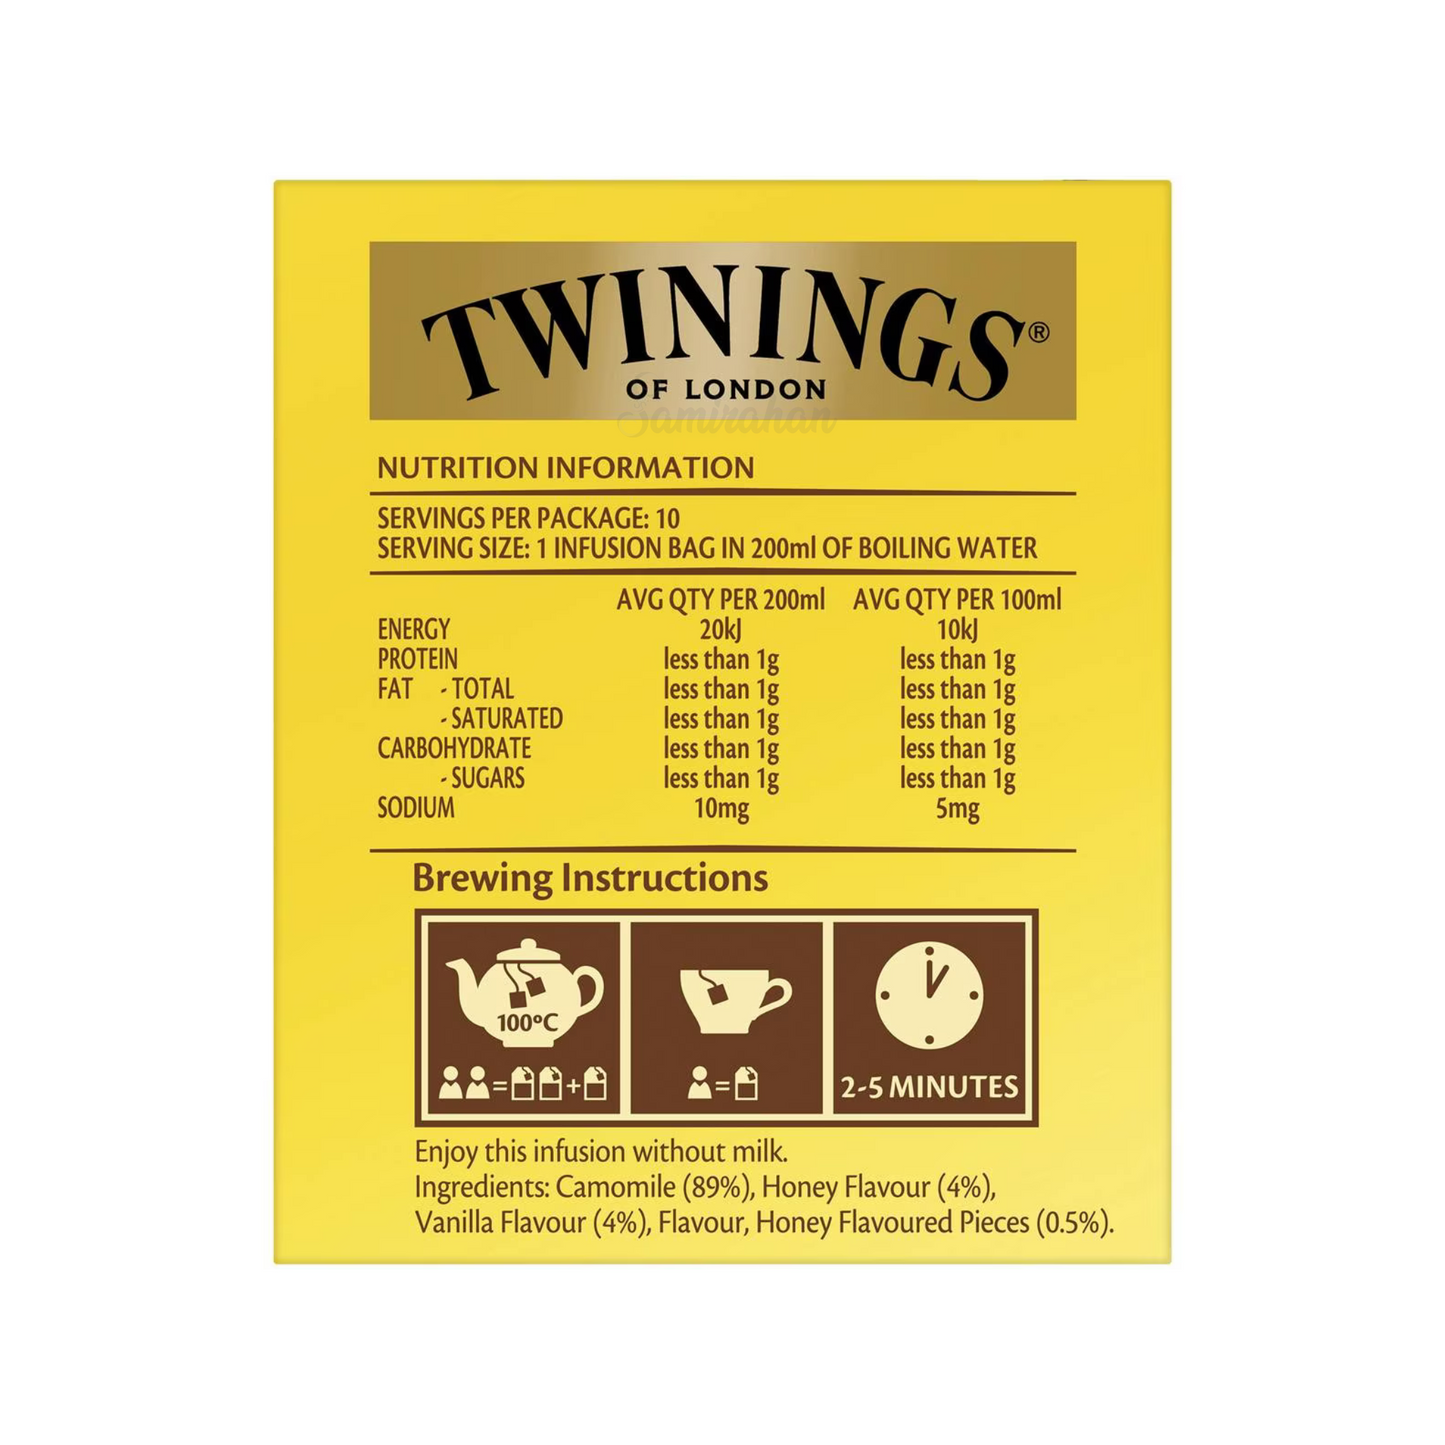 Twinings Camomile Honey & Vanilla is naturally caffeine free. Soothing & delicate, it is a delicious treat just for you. Best genuine authentic foreign imported real Australian British UK instant strong delicious premium luxury quality original tasty tea bag cheap price in Dhaka Chittagong Sylhet Rajshahi Bangladesh.